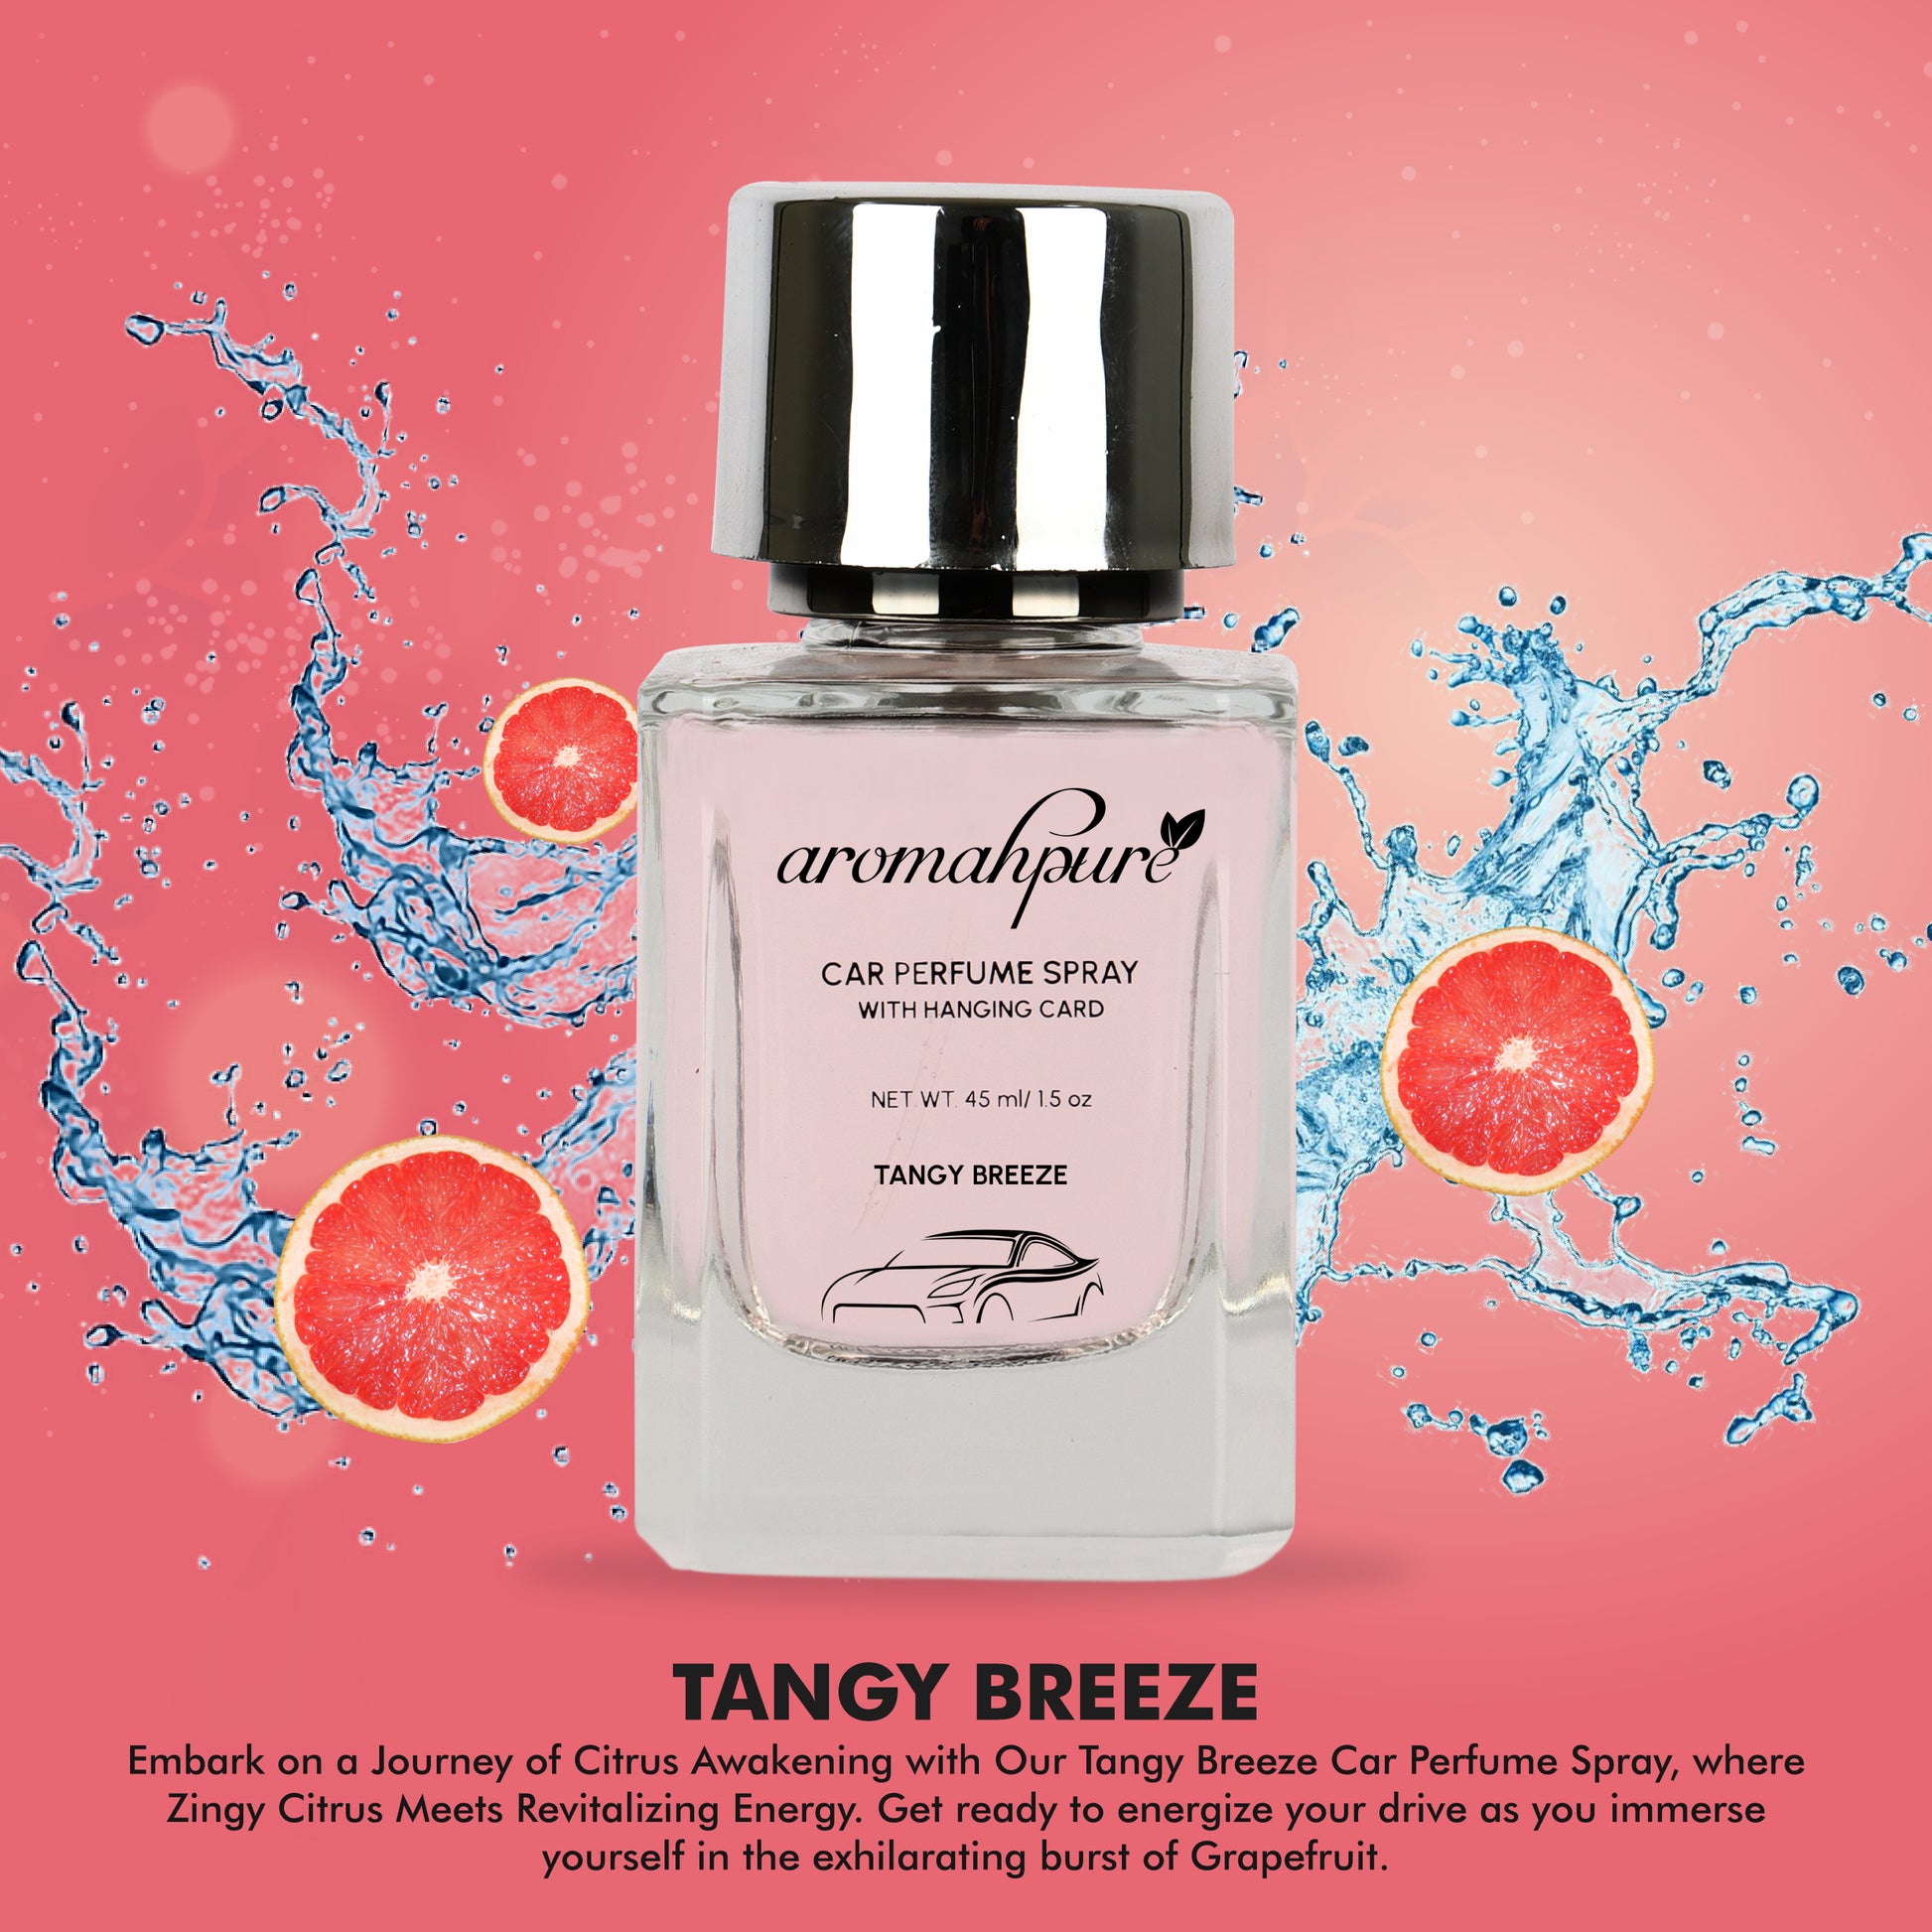 Buy Car Perfume Spray with Hanging Card (Tangy Breeze) Online - Aromahpure